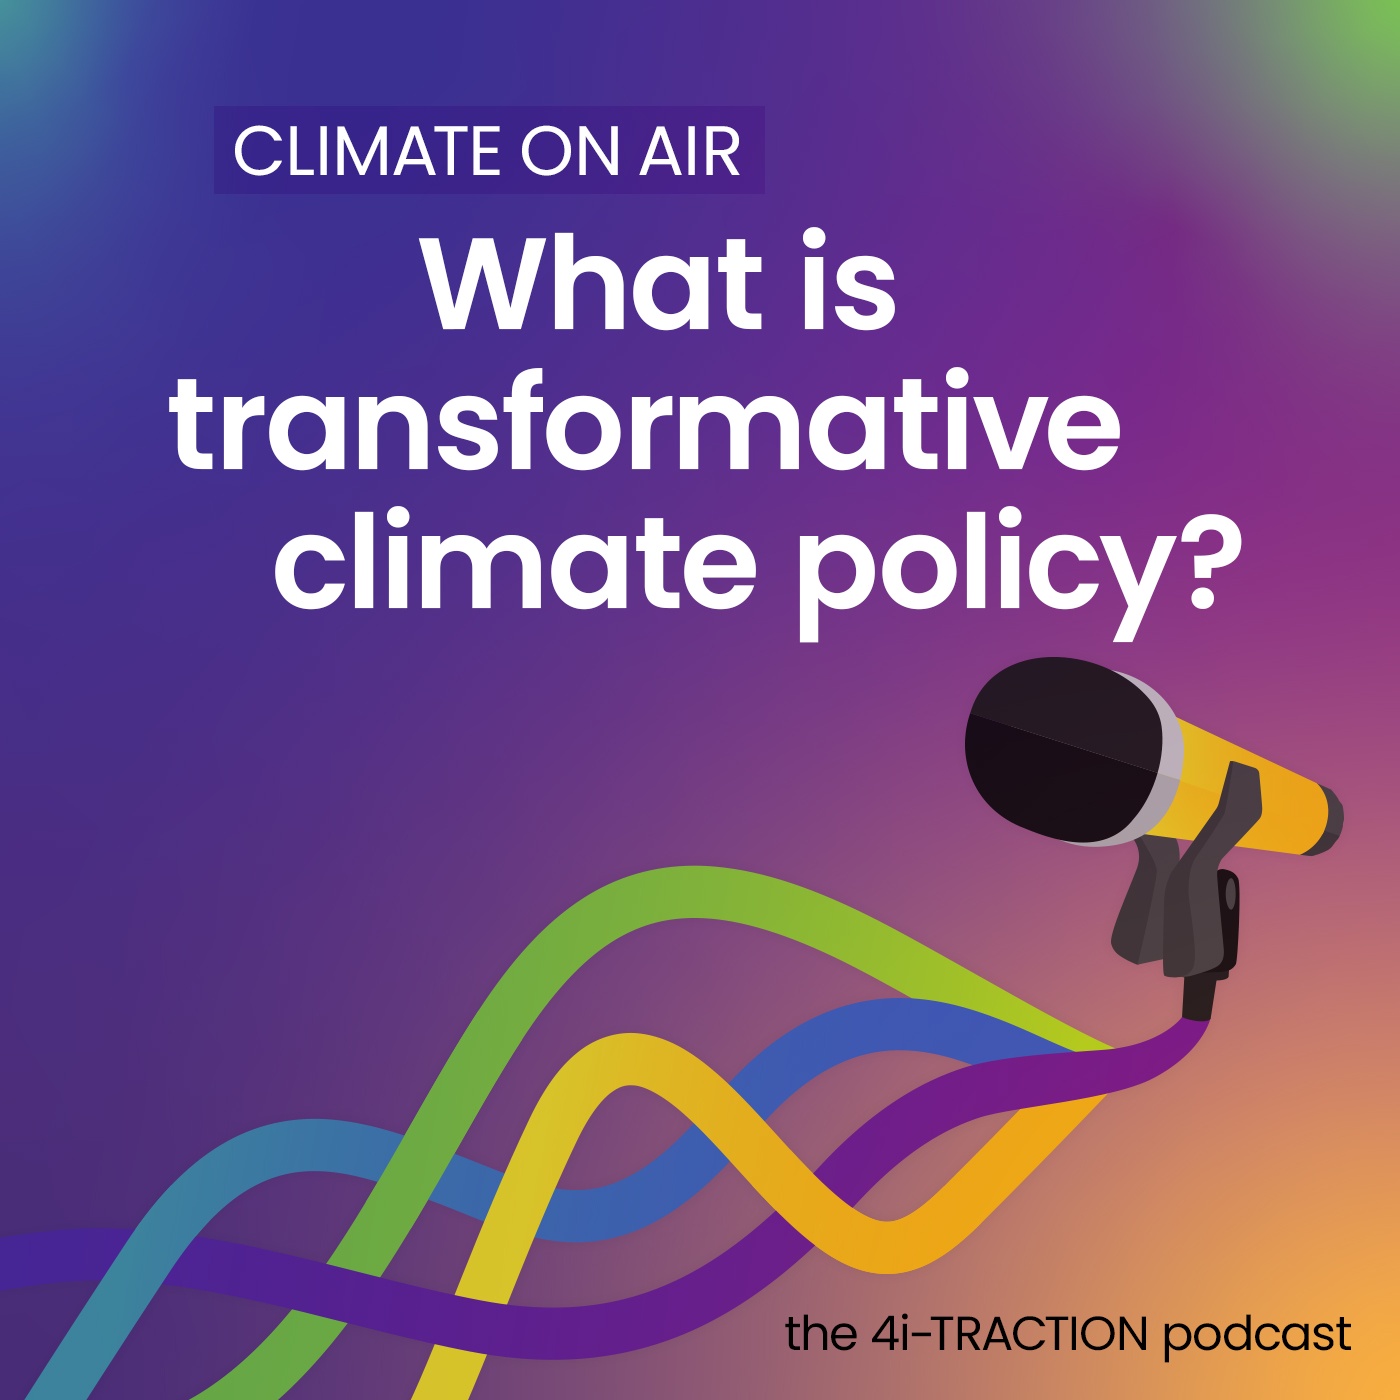 What is transformative climate policy?